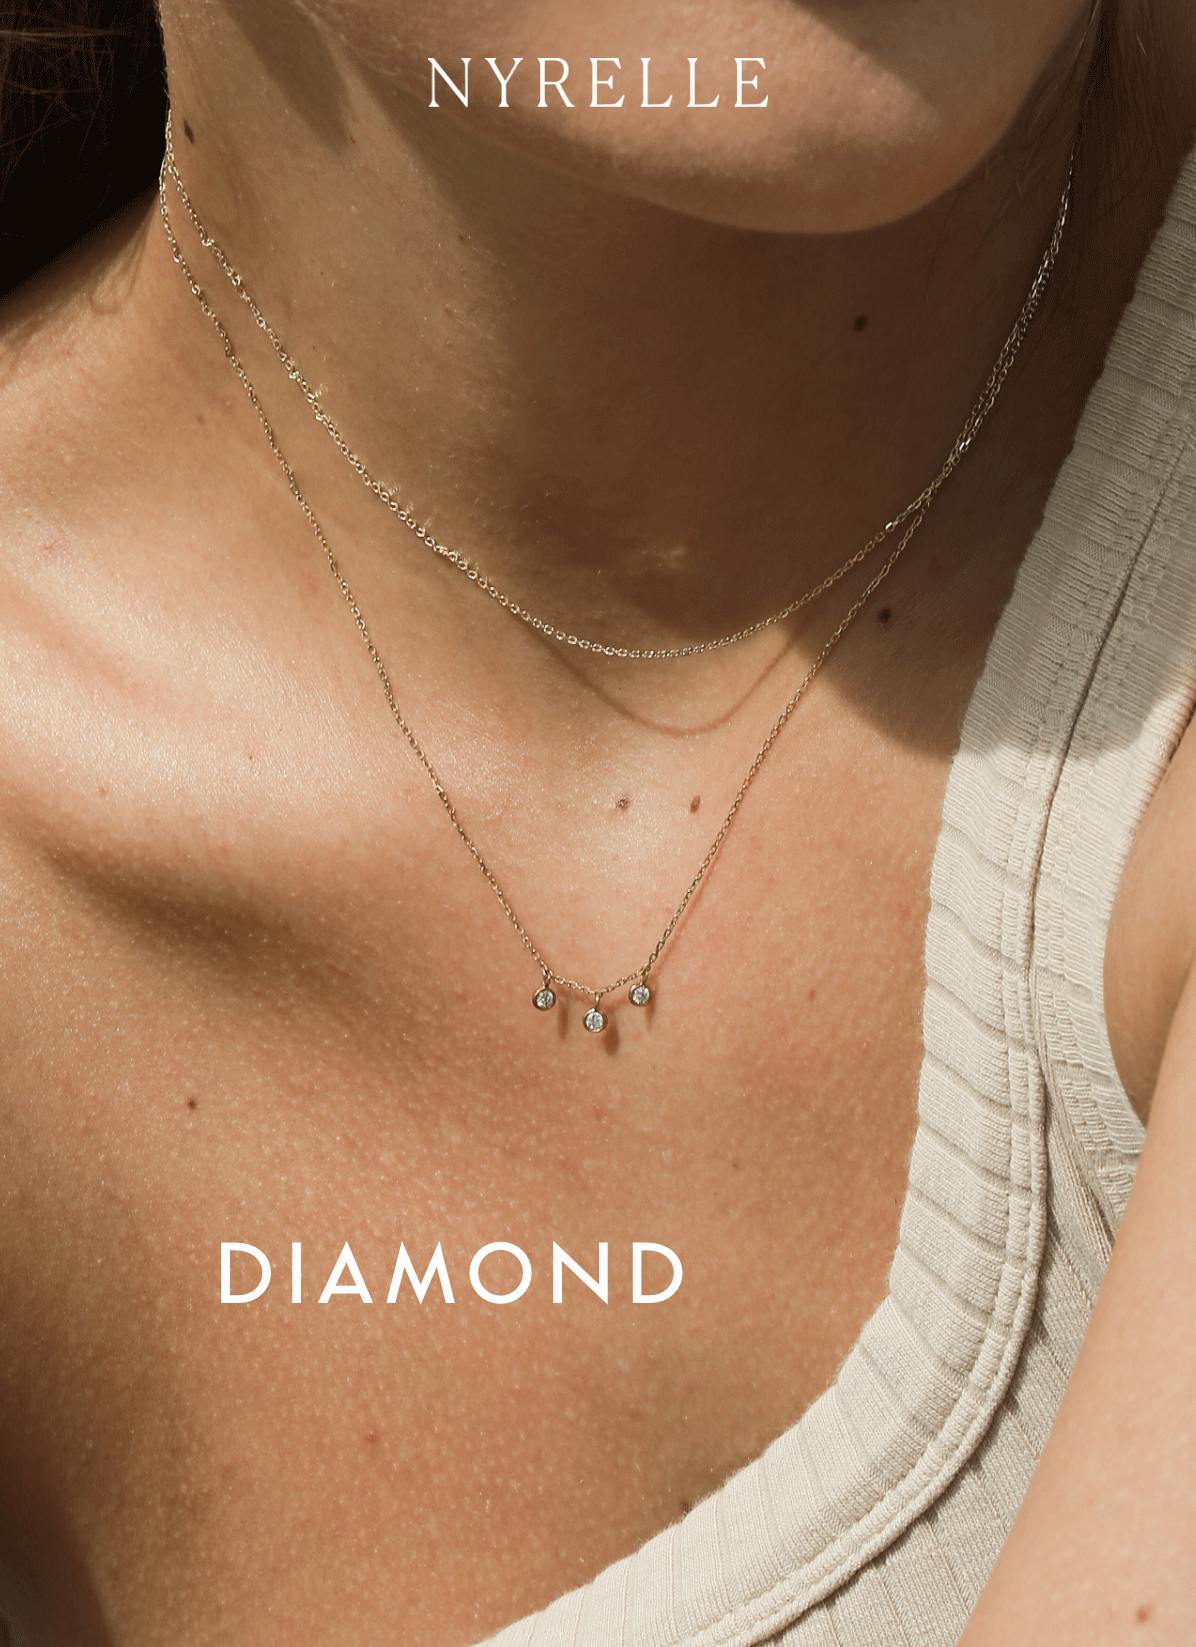 E-commerce Email GIF Design by Graphic Design Expert in Hong Kong Kyra Janelle Featuring Customer Reviews of NYRELLE's Best-Selling Diamond Drop Necklace.